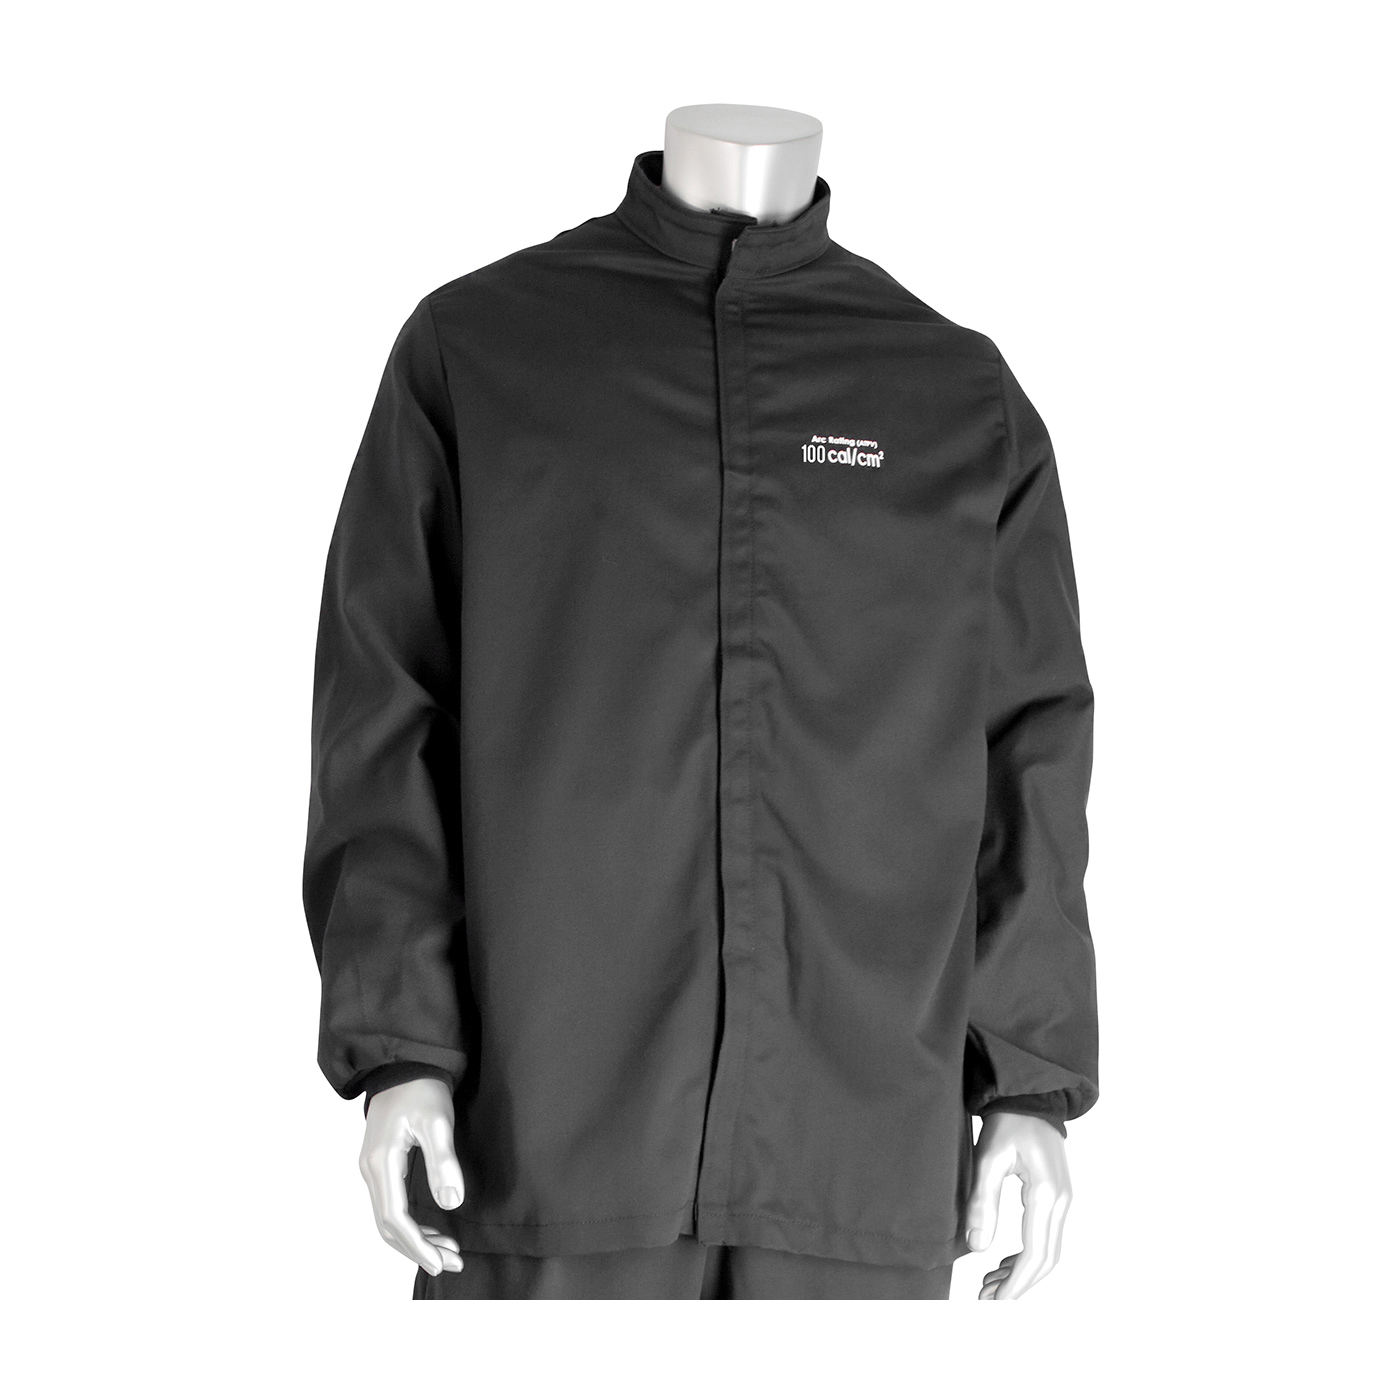 PIP® 9100-52750/3XL Arc and Flame Resistant Jacket, 3XL, Gray, Aramid/Cotton, 56 to 58 in Chest, Resists: Arc and Flame, ASTM F1506-10a, ASTM F2178-12